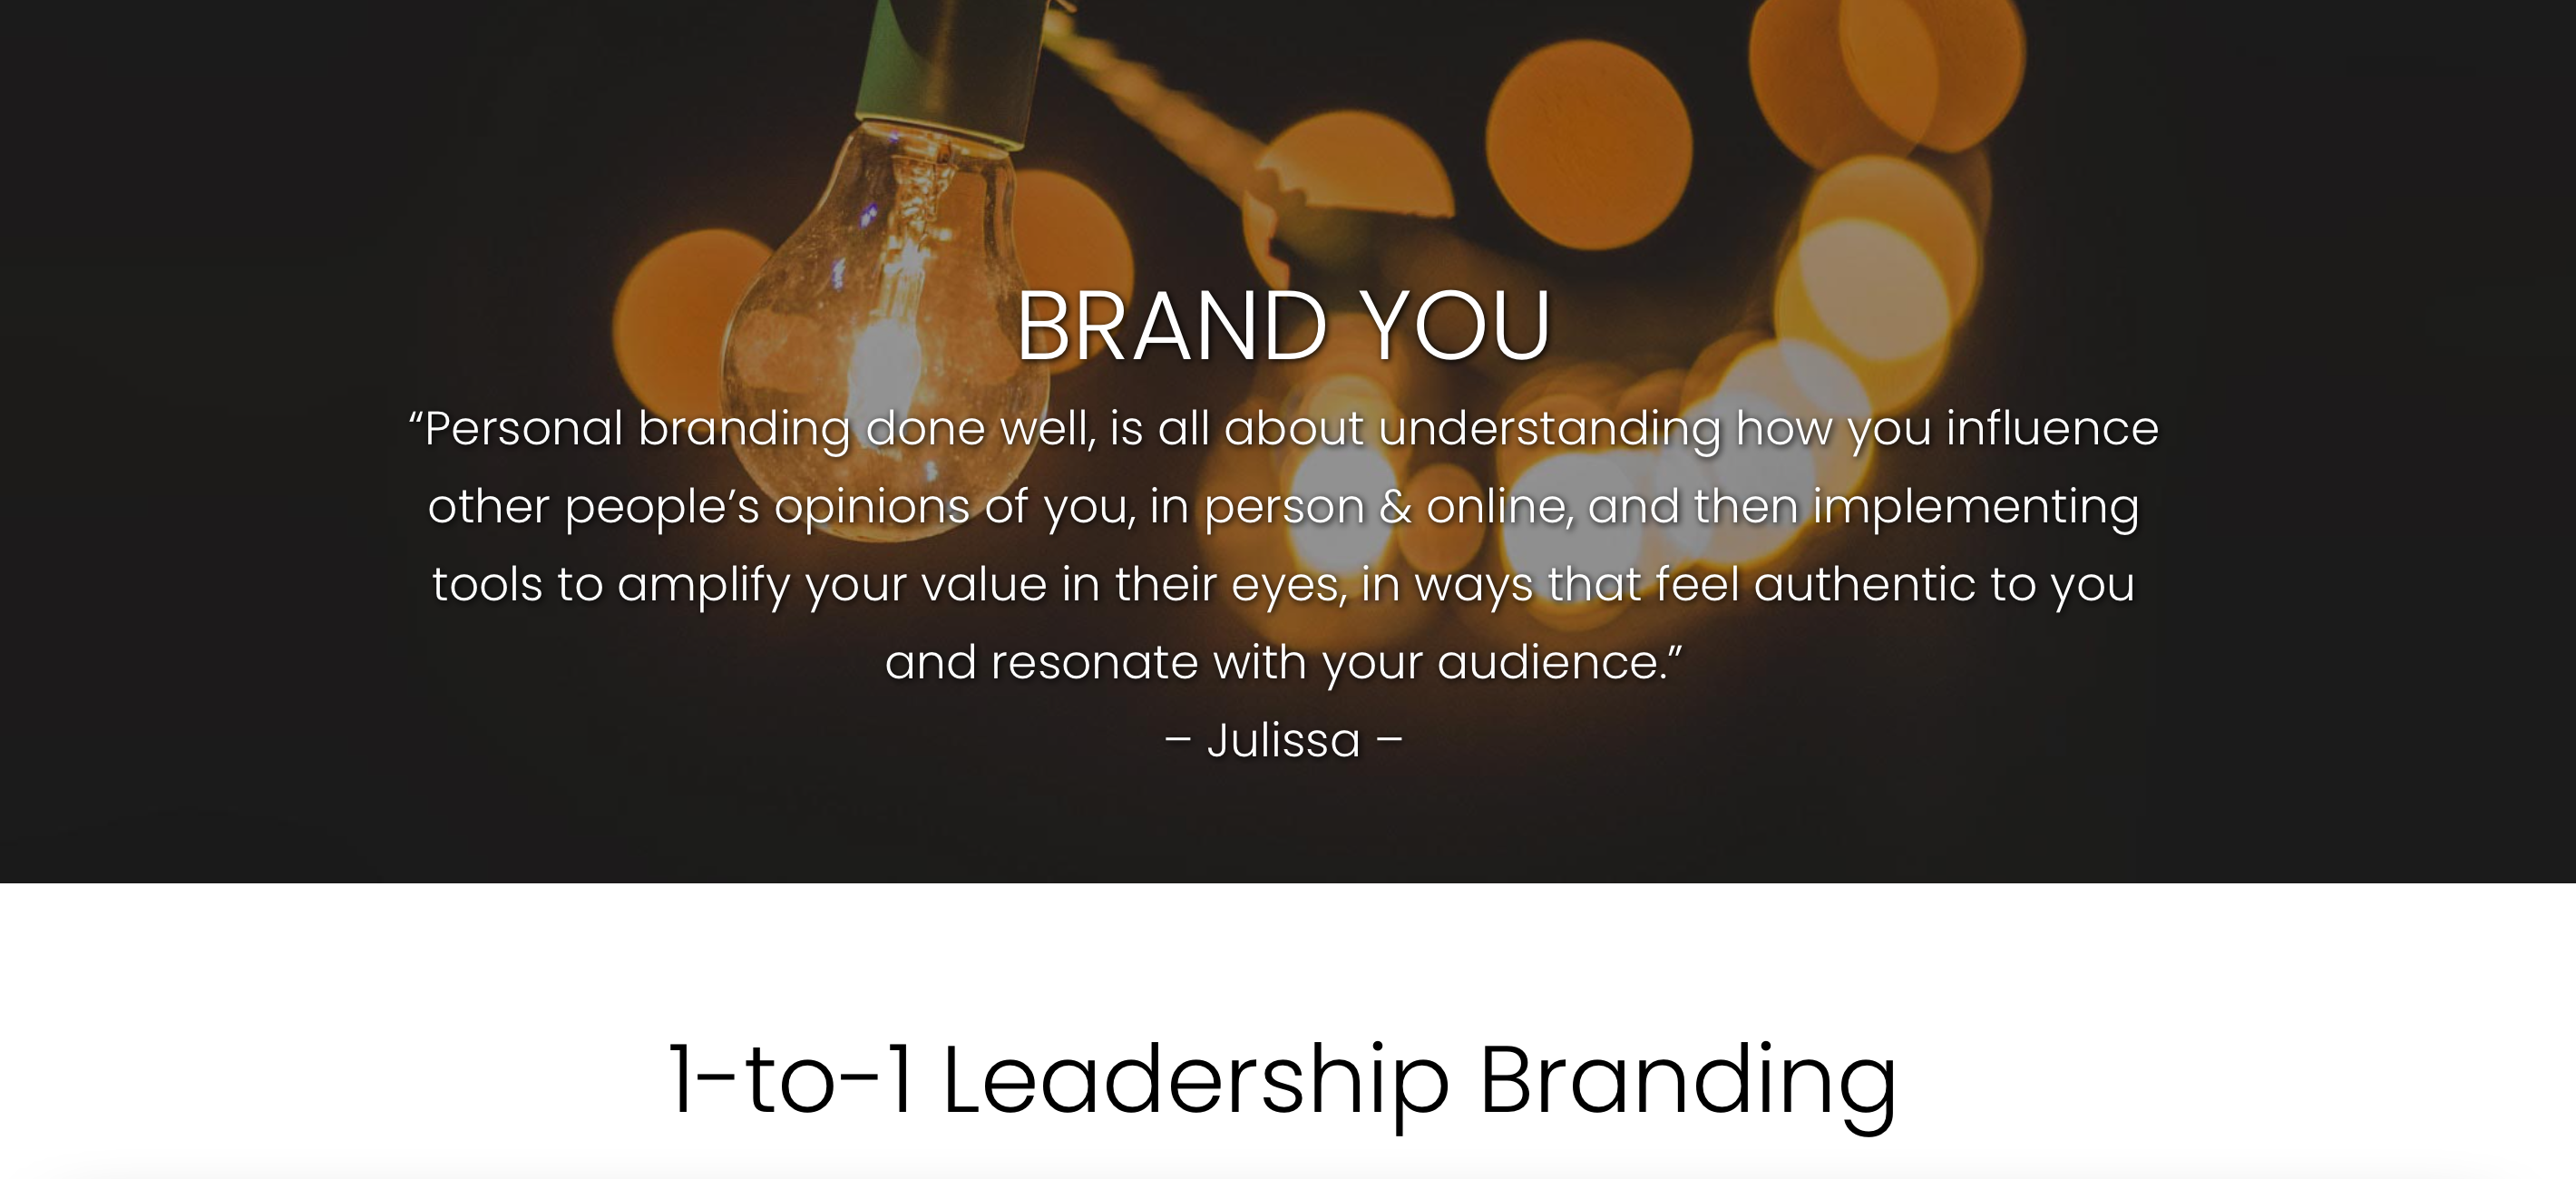 Brand Culture by NWC slide deck image